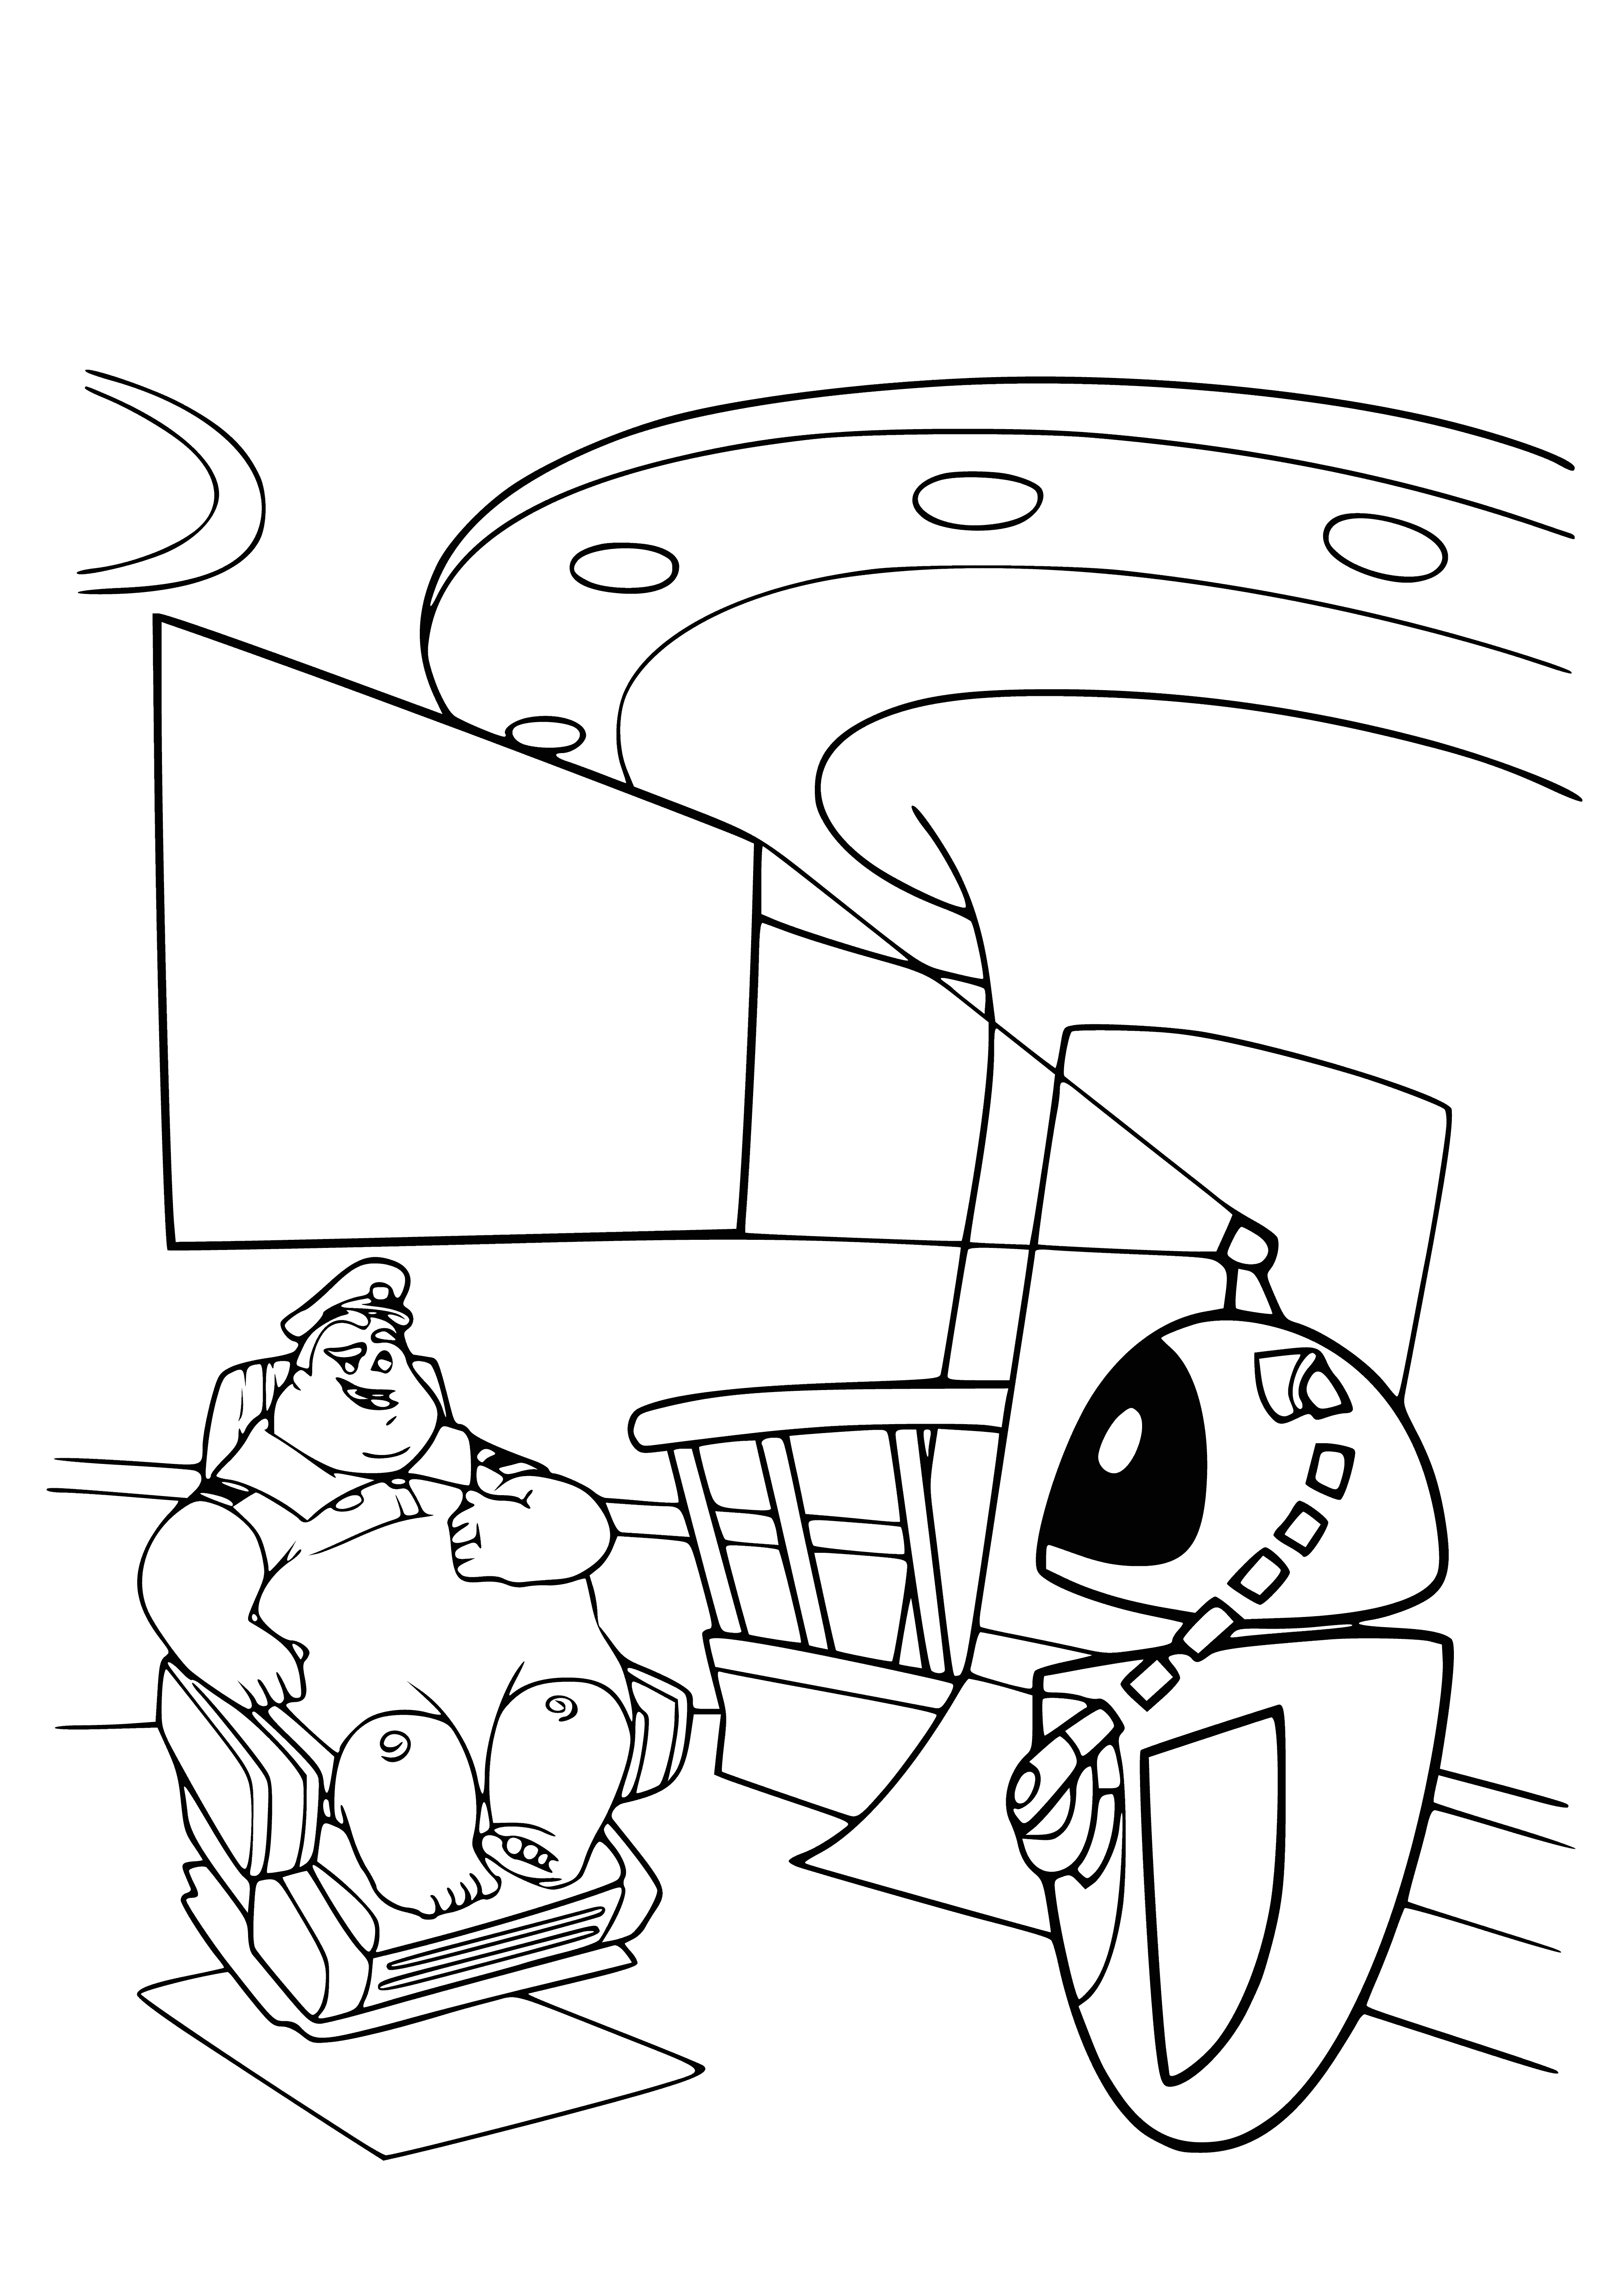 coloring page: Wall-e offers a potted plant to Eva, and the captain looks on. #loveatfirstsight